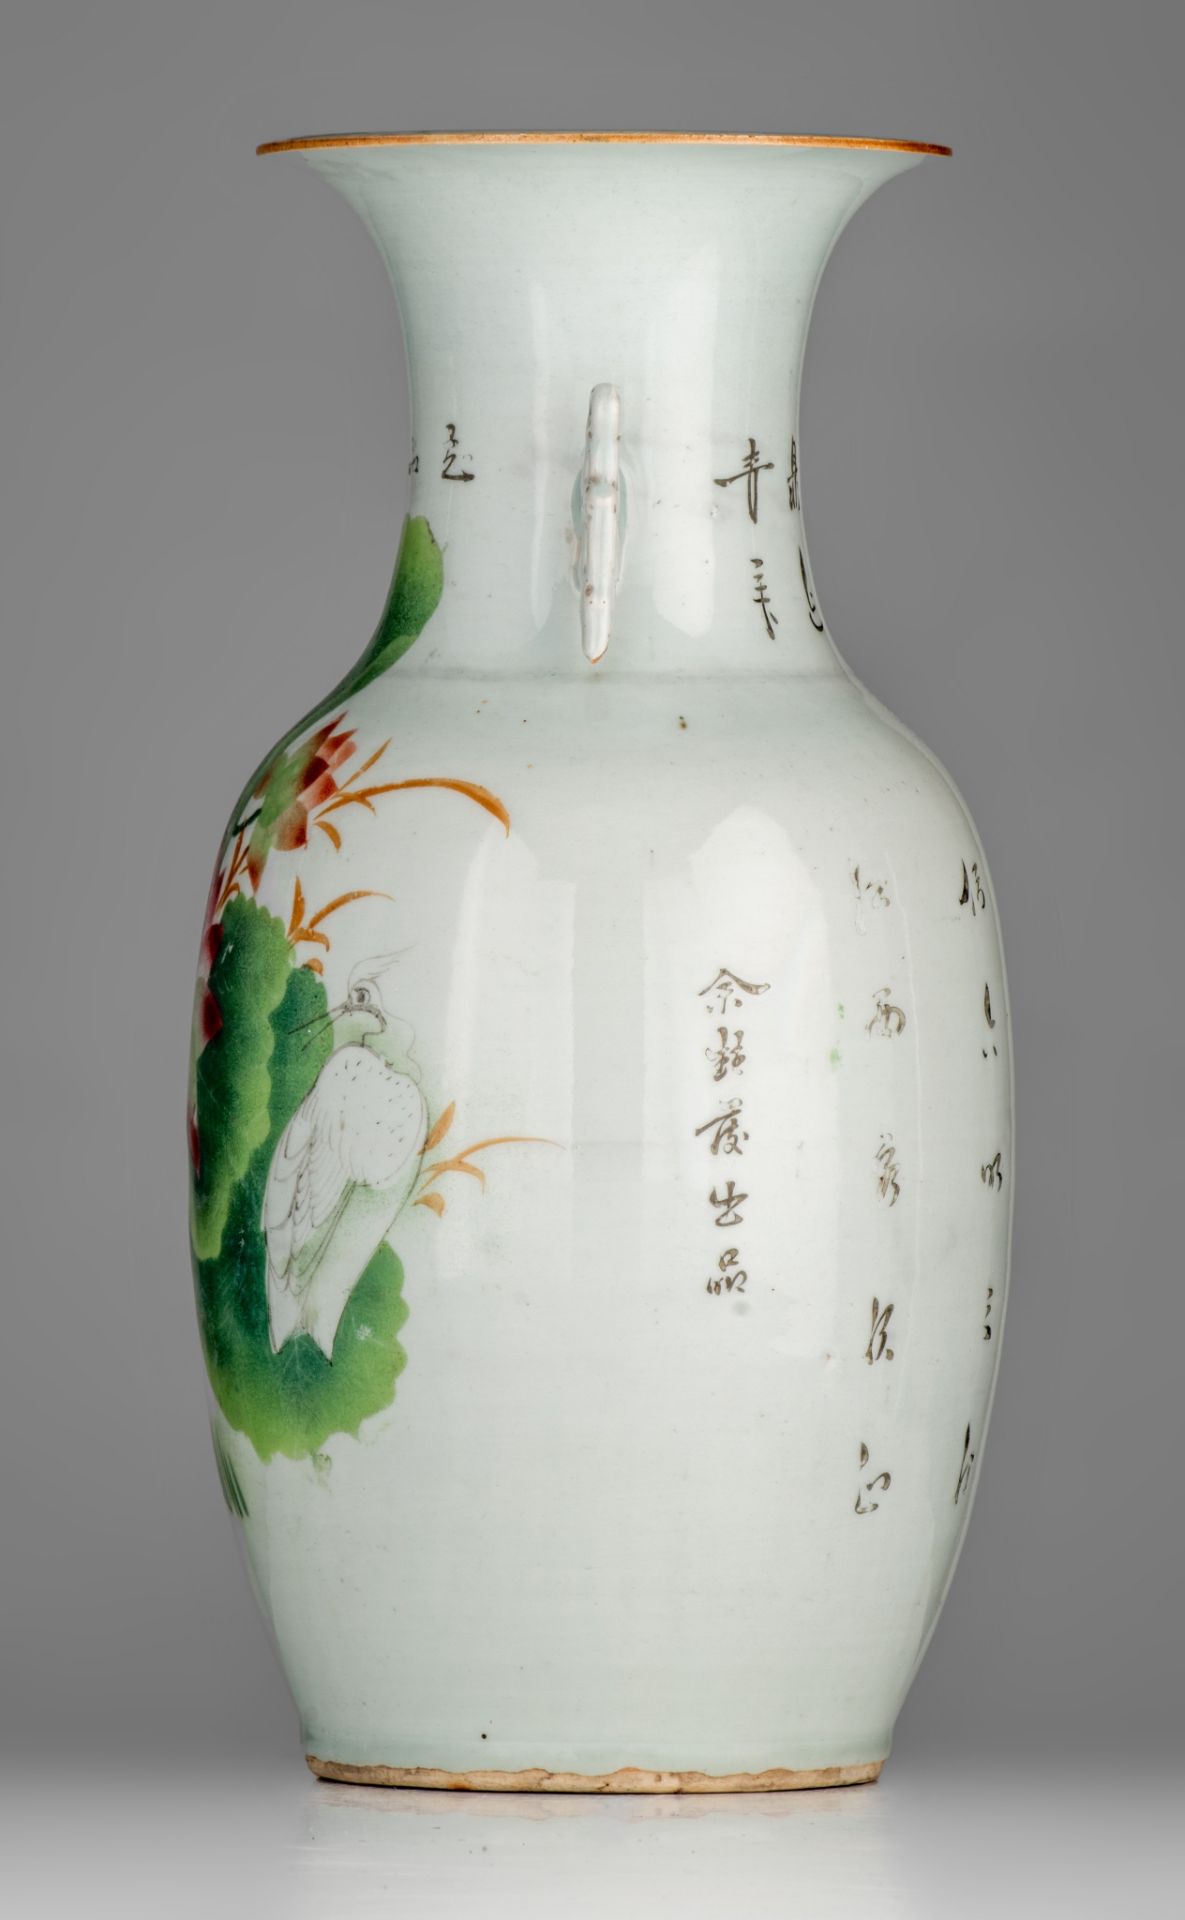 Four Chinese famille rose vases, some with a signed text, 19thC and Republic period, H 42,5 - 43,5 c - Bild 9 aus 20